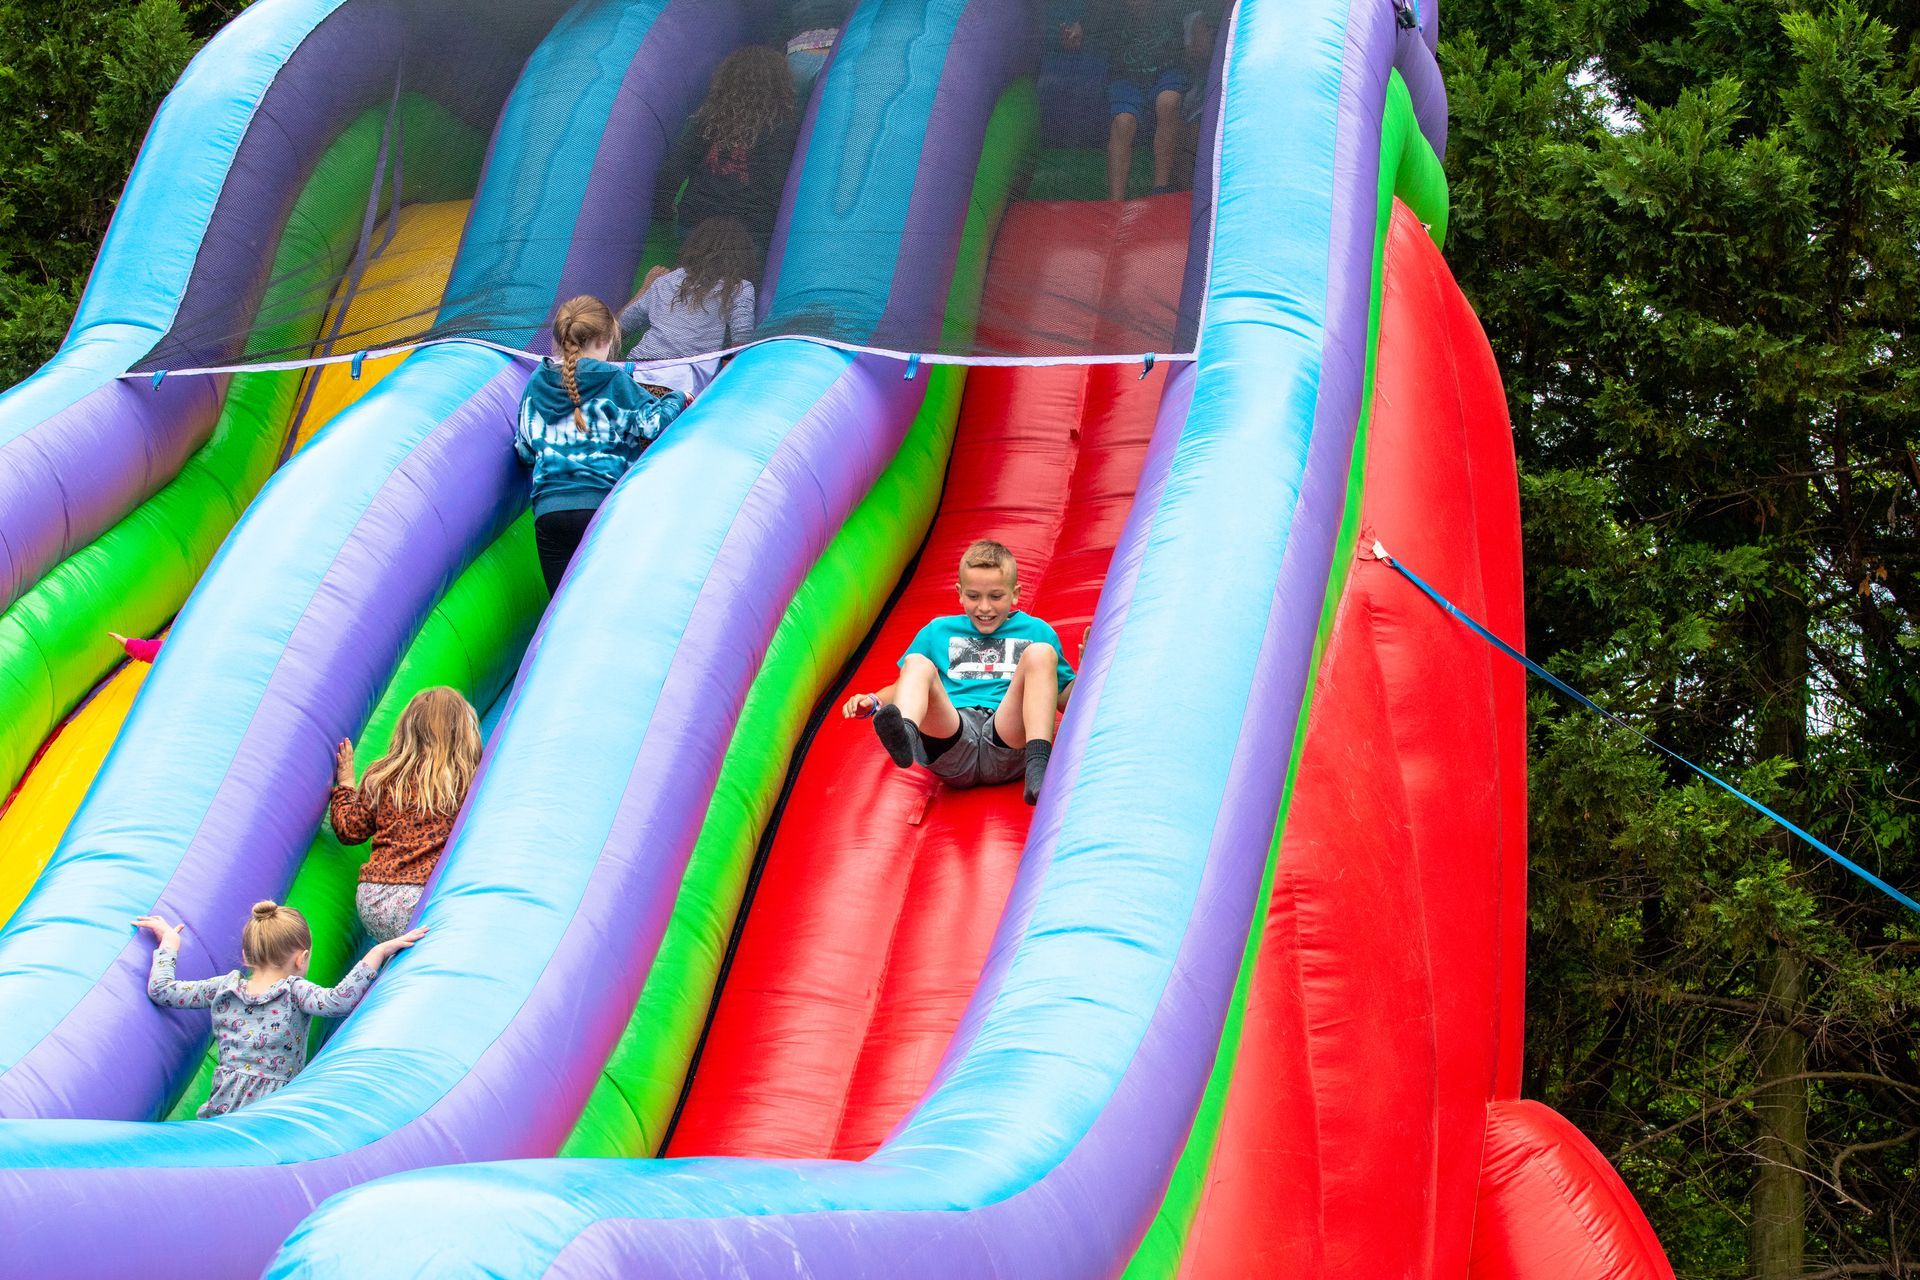 A group of children are riding down a colorful inflatable slide.